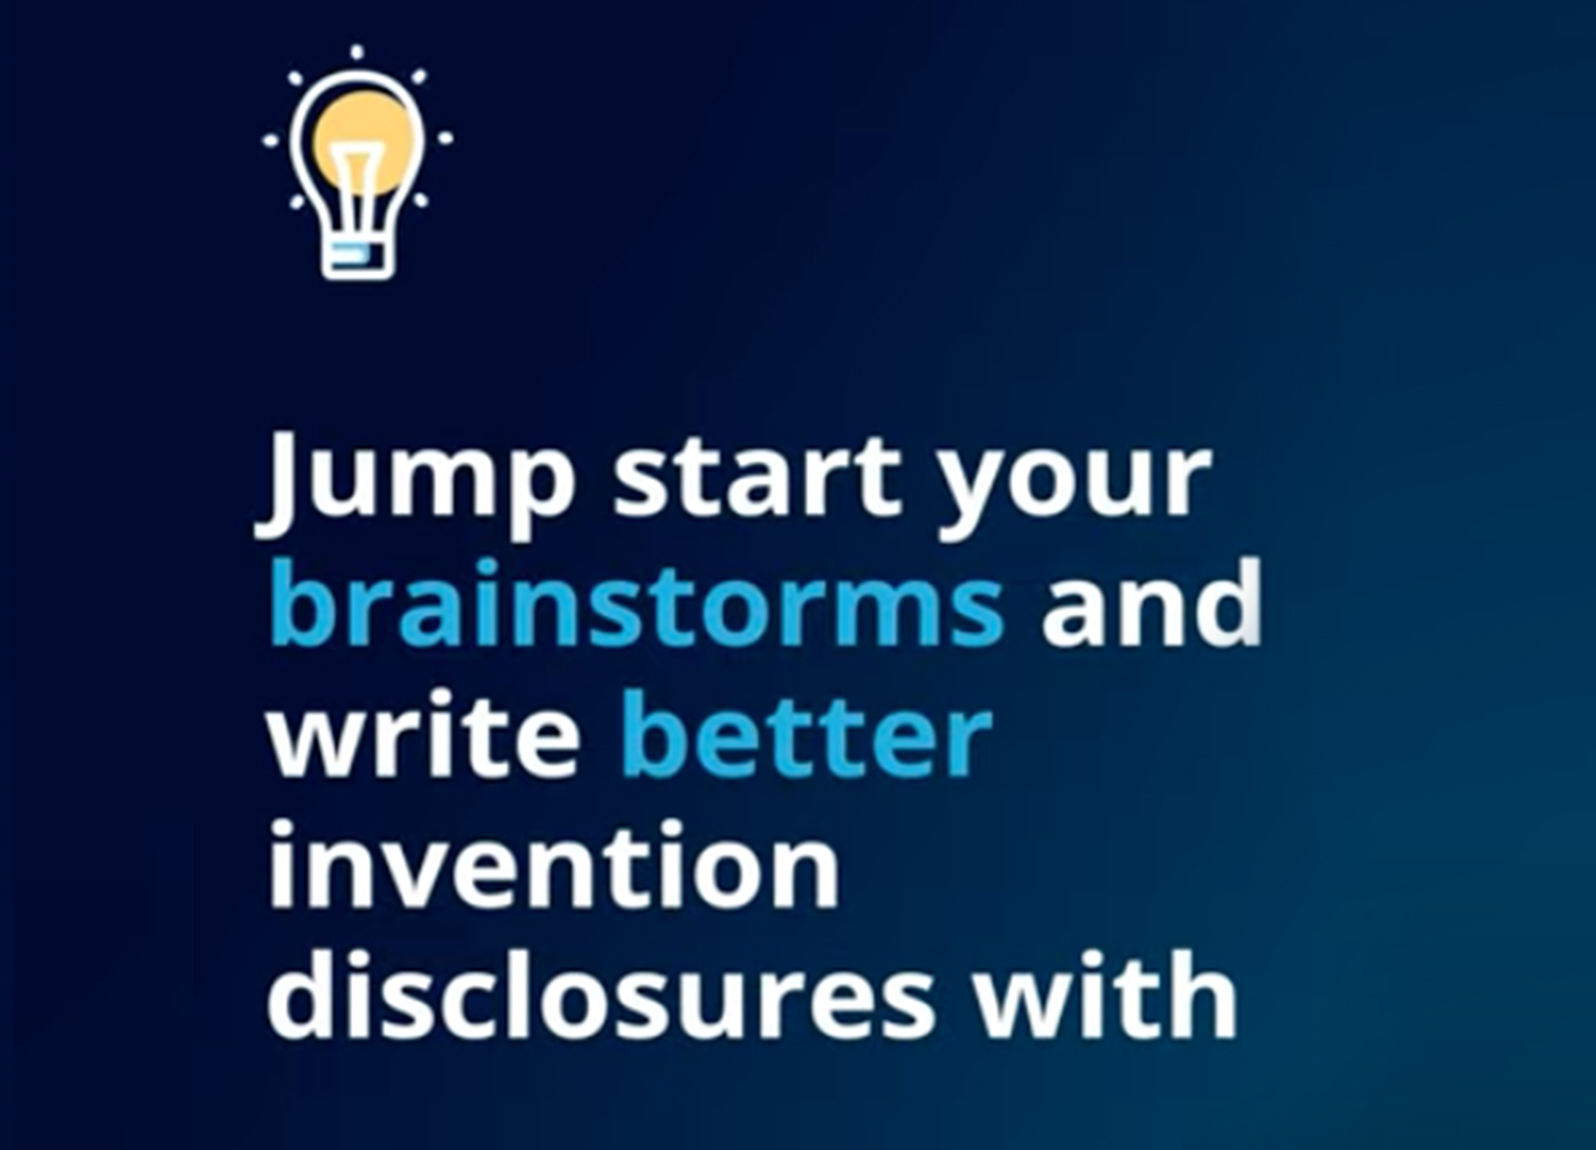 Jump start your brainstorms and write better invention disclosures with IP.com